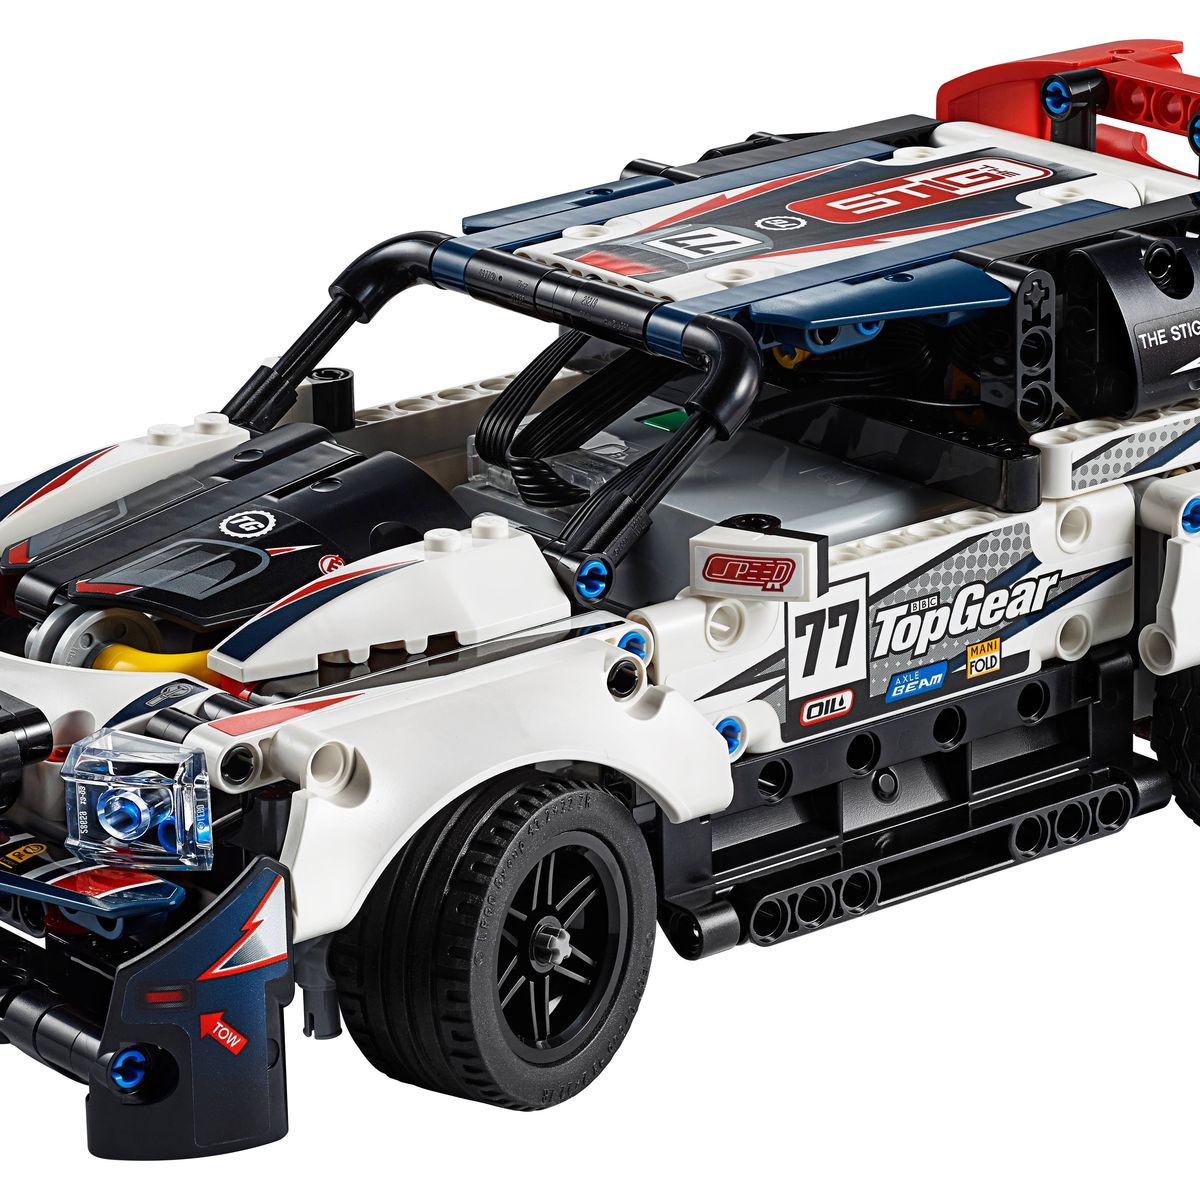 Top Gear's Top 9: the best Lego cars to build right now